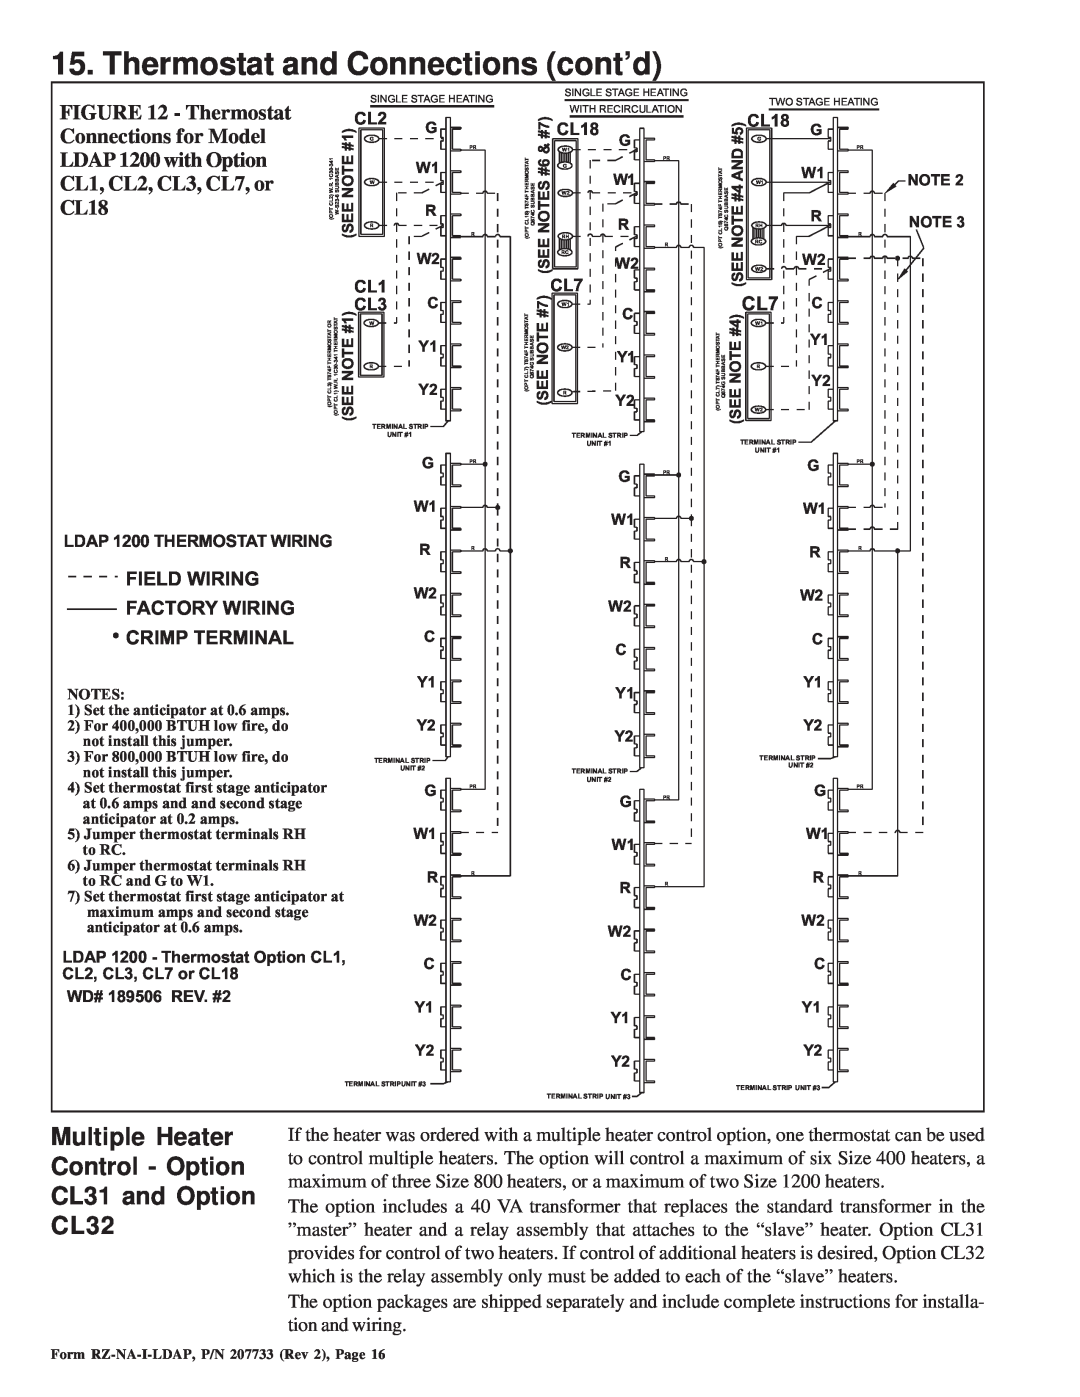 Thomas & Betts LDAP 1200 warranty Thermostat and Connections cont’d, Multiple Heater Control - Option CL31 and Option, CL32 